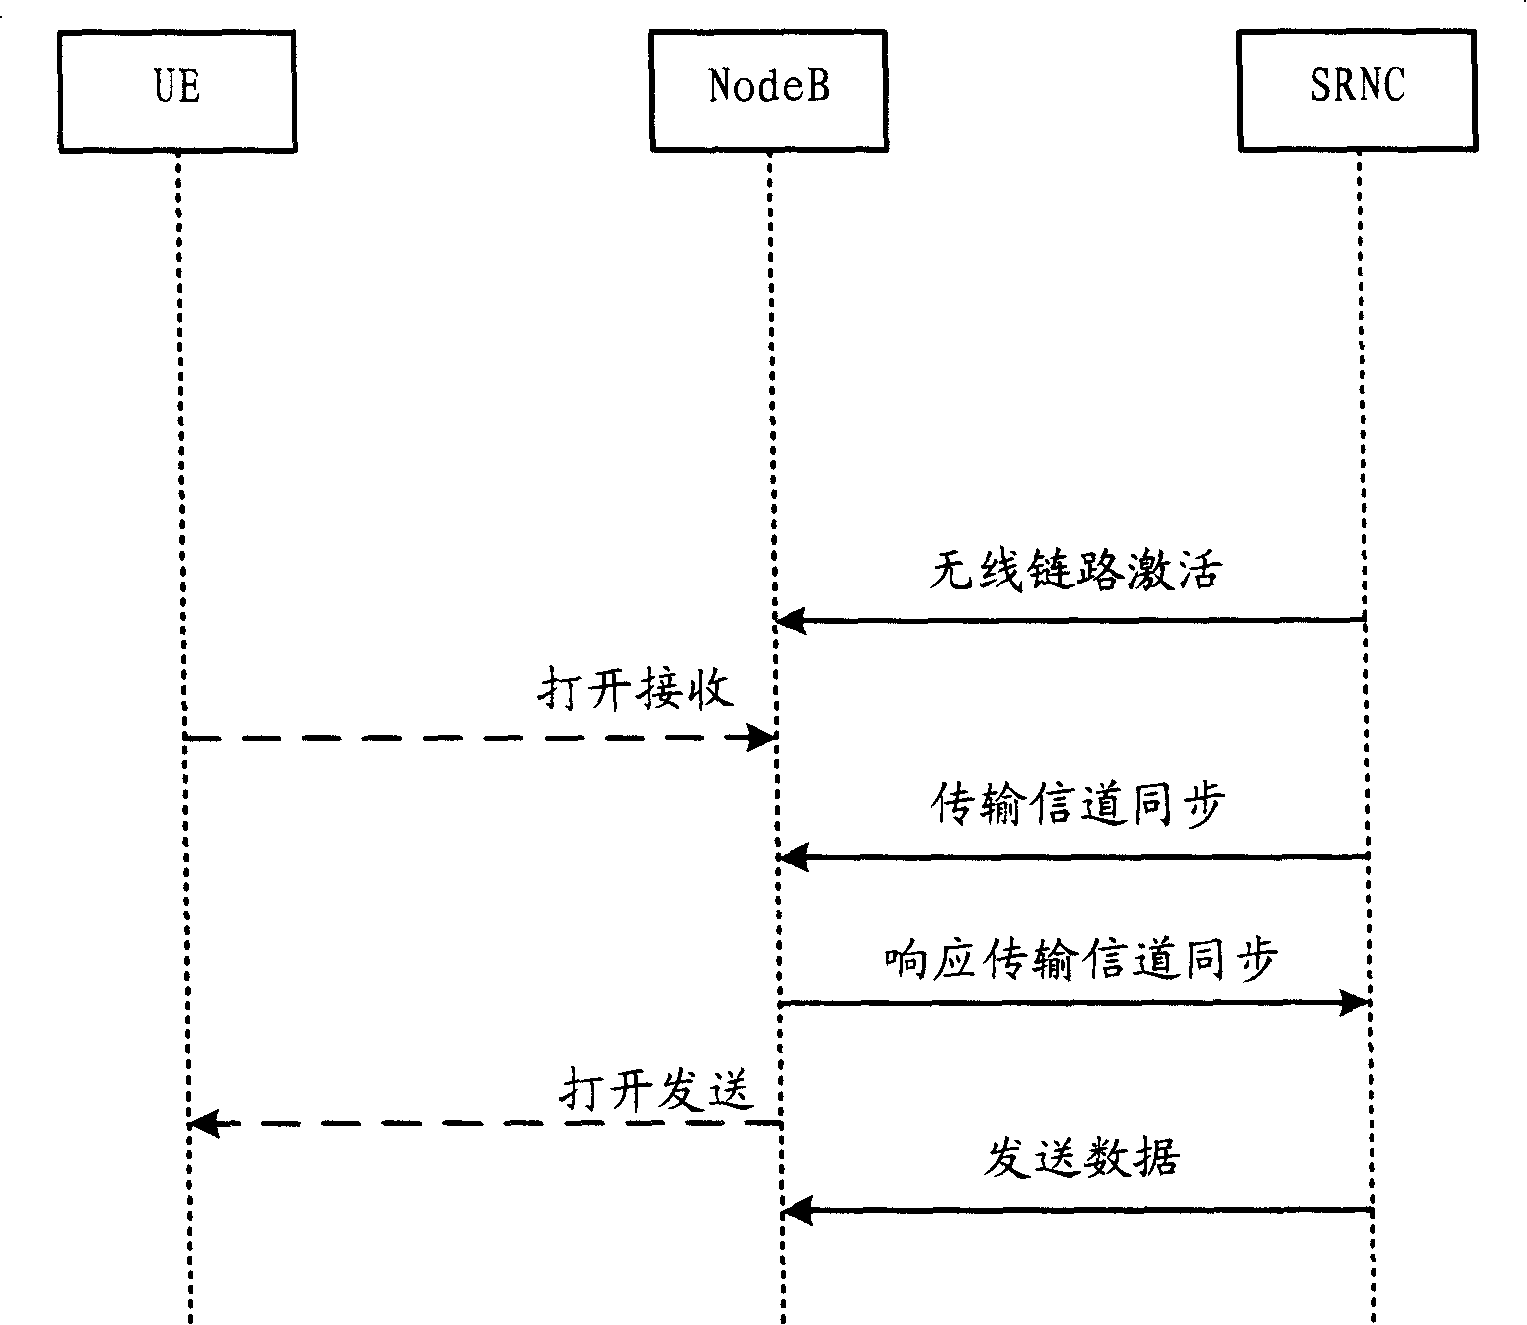 Preset resource active method in mobile communication system